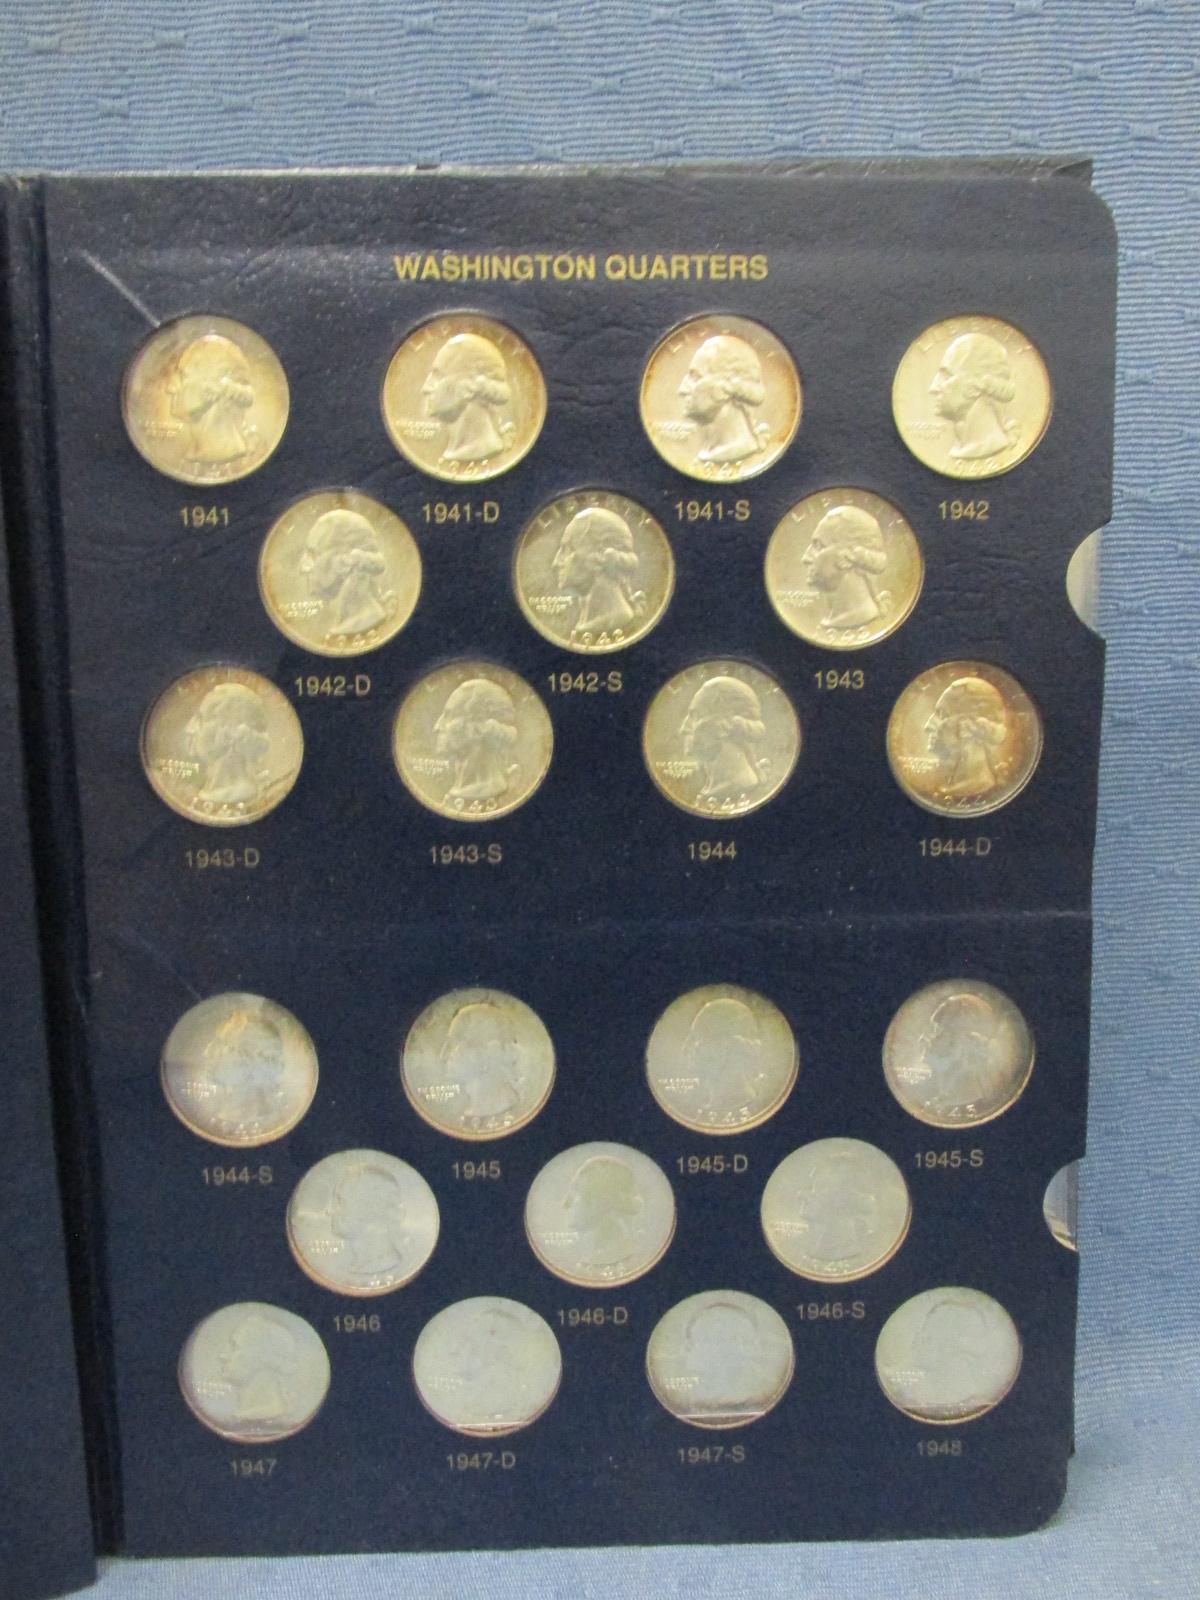 Washington Quarter Book – 120 Coins(holds 154) – 1932-1990 – As shown – Did not verify if each coin